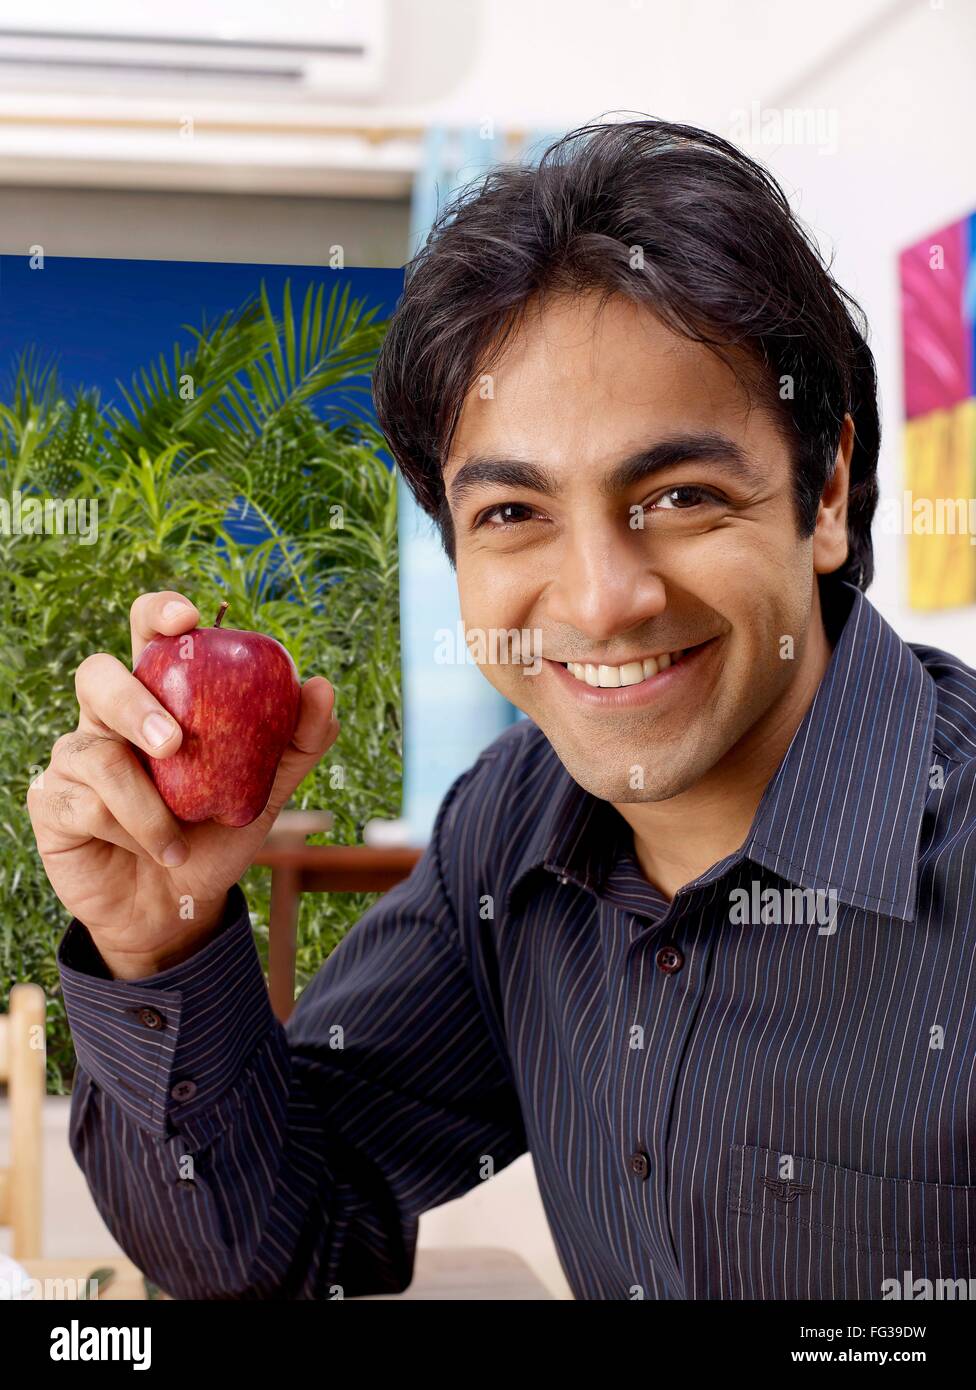 Young man showing red apple in hand MR#702V Stock Photo